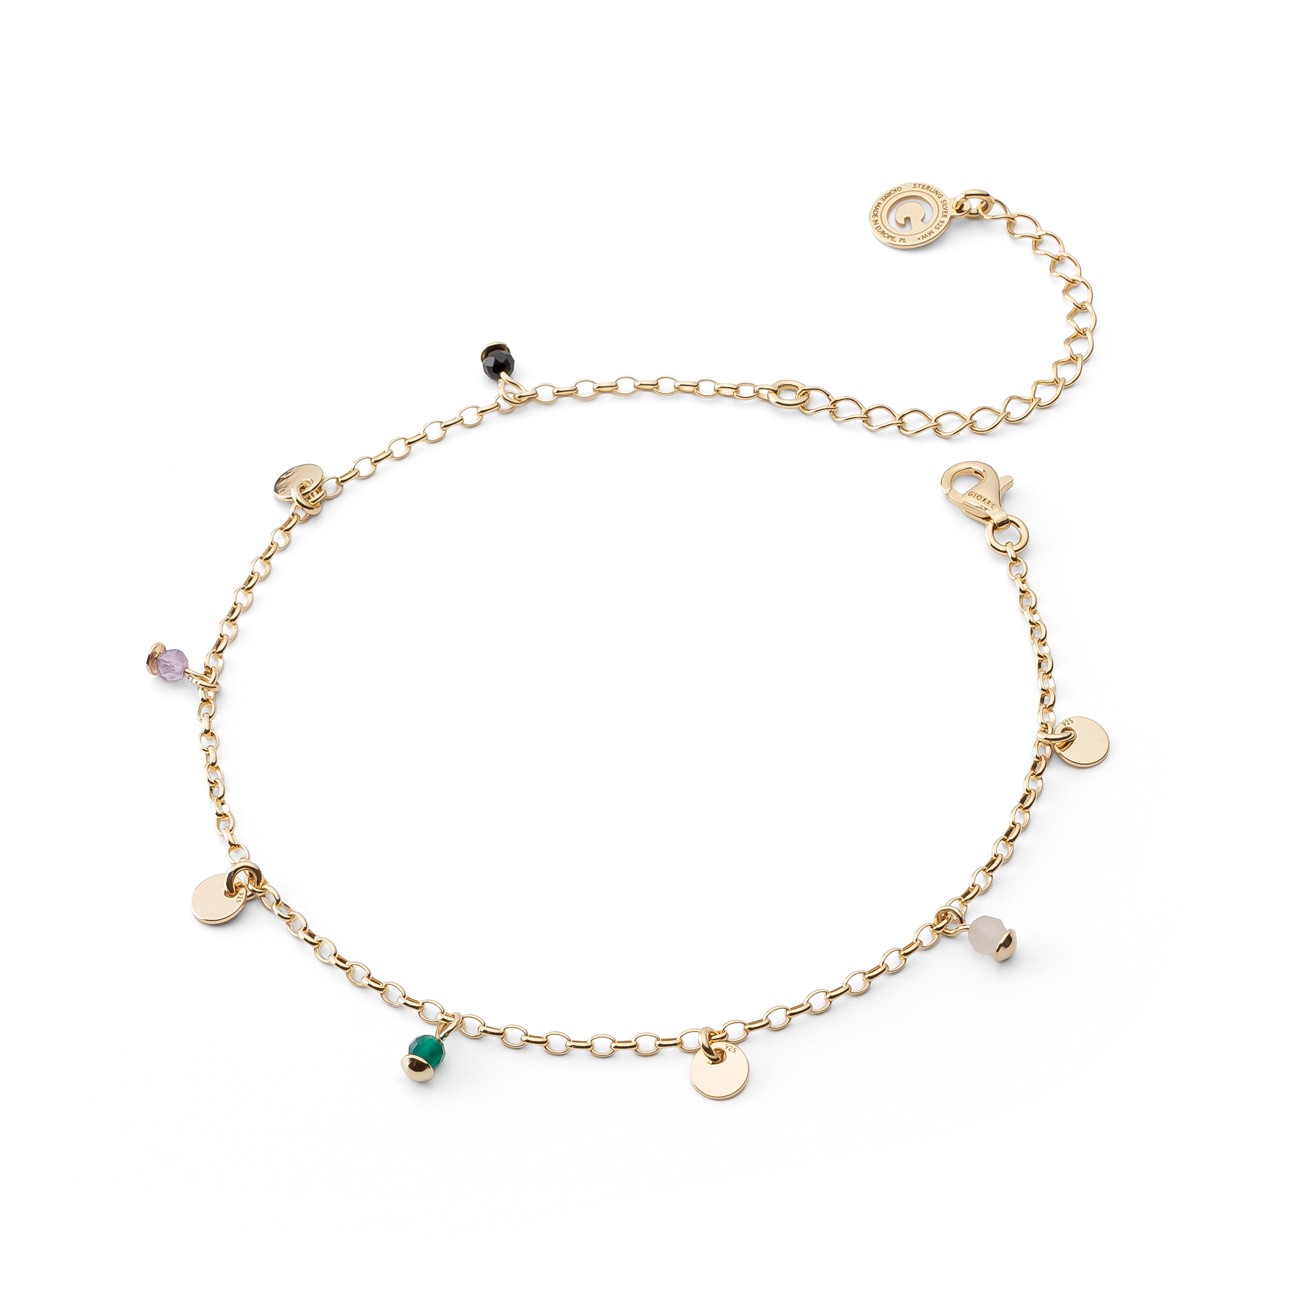 An ankle bracelet with plaques and colored stones, sterling silver 925